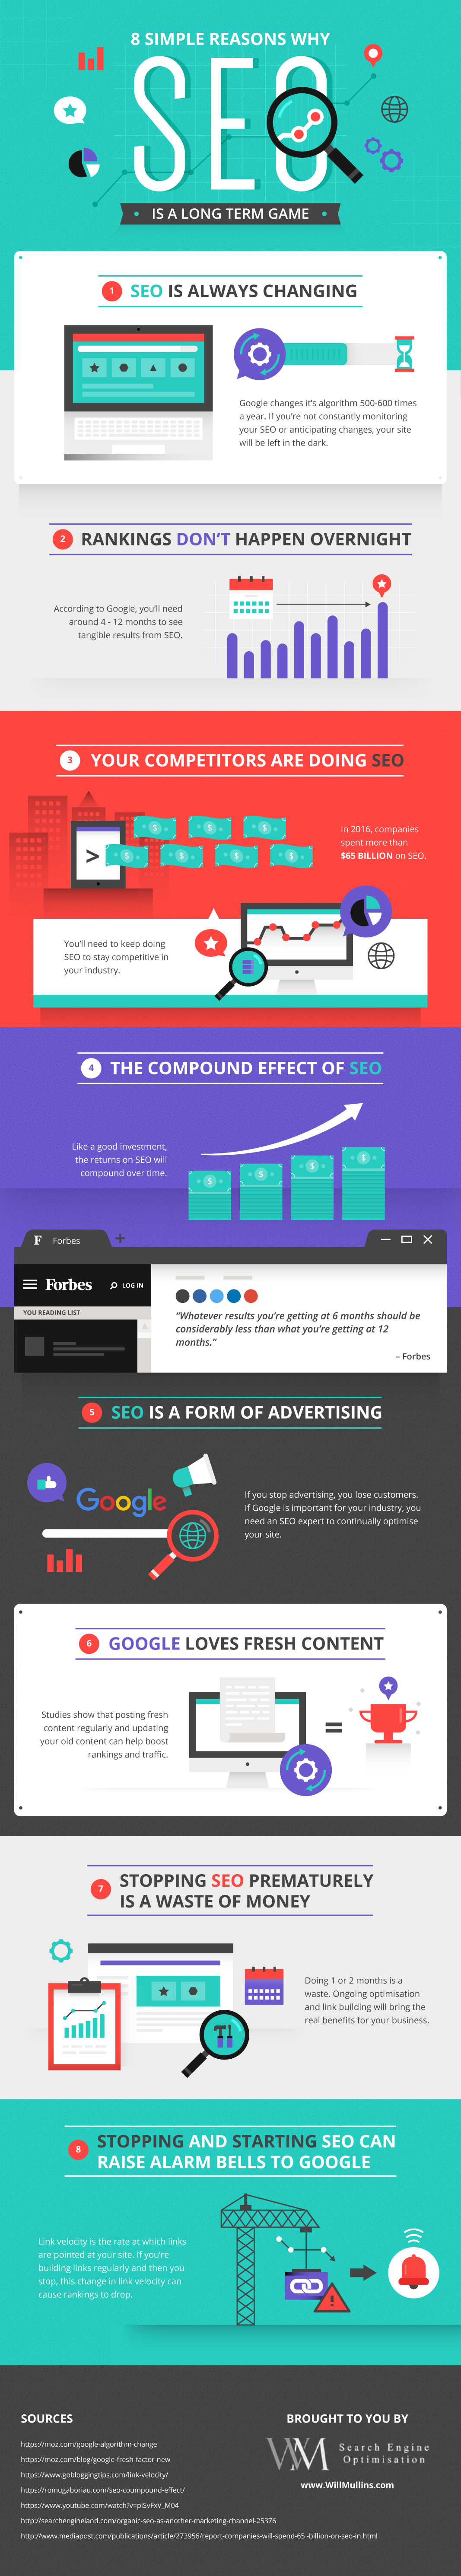 Infographic for 8 Simple Reasons Why SEO Is A Long Term Game